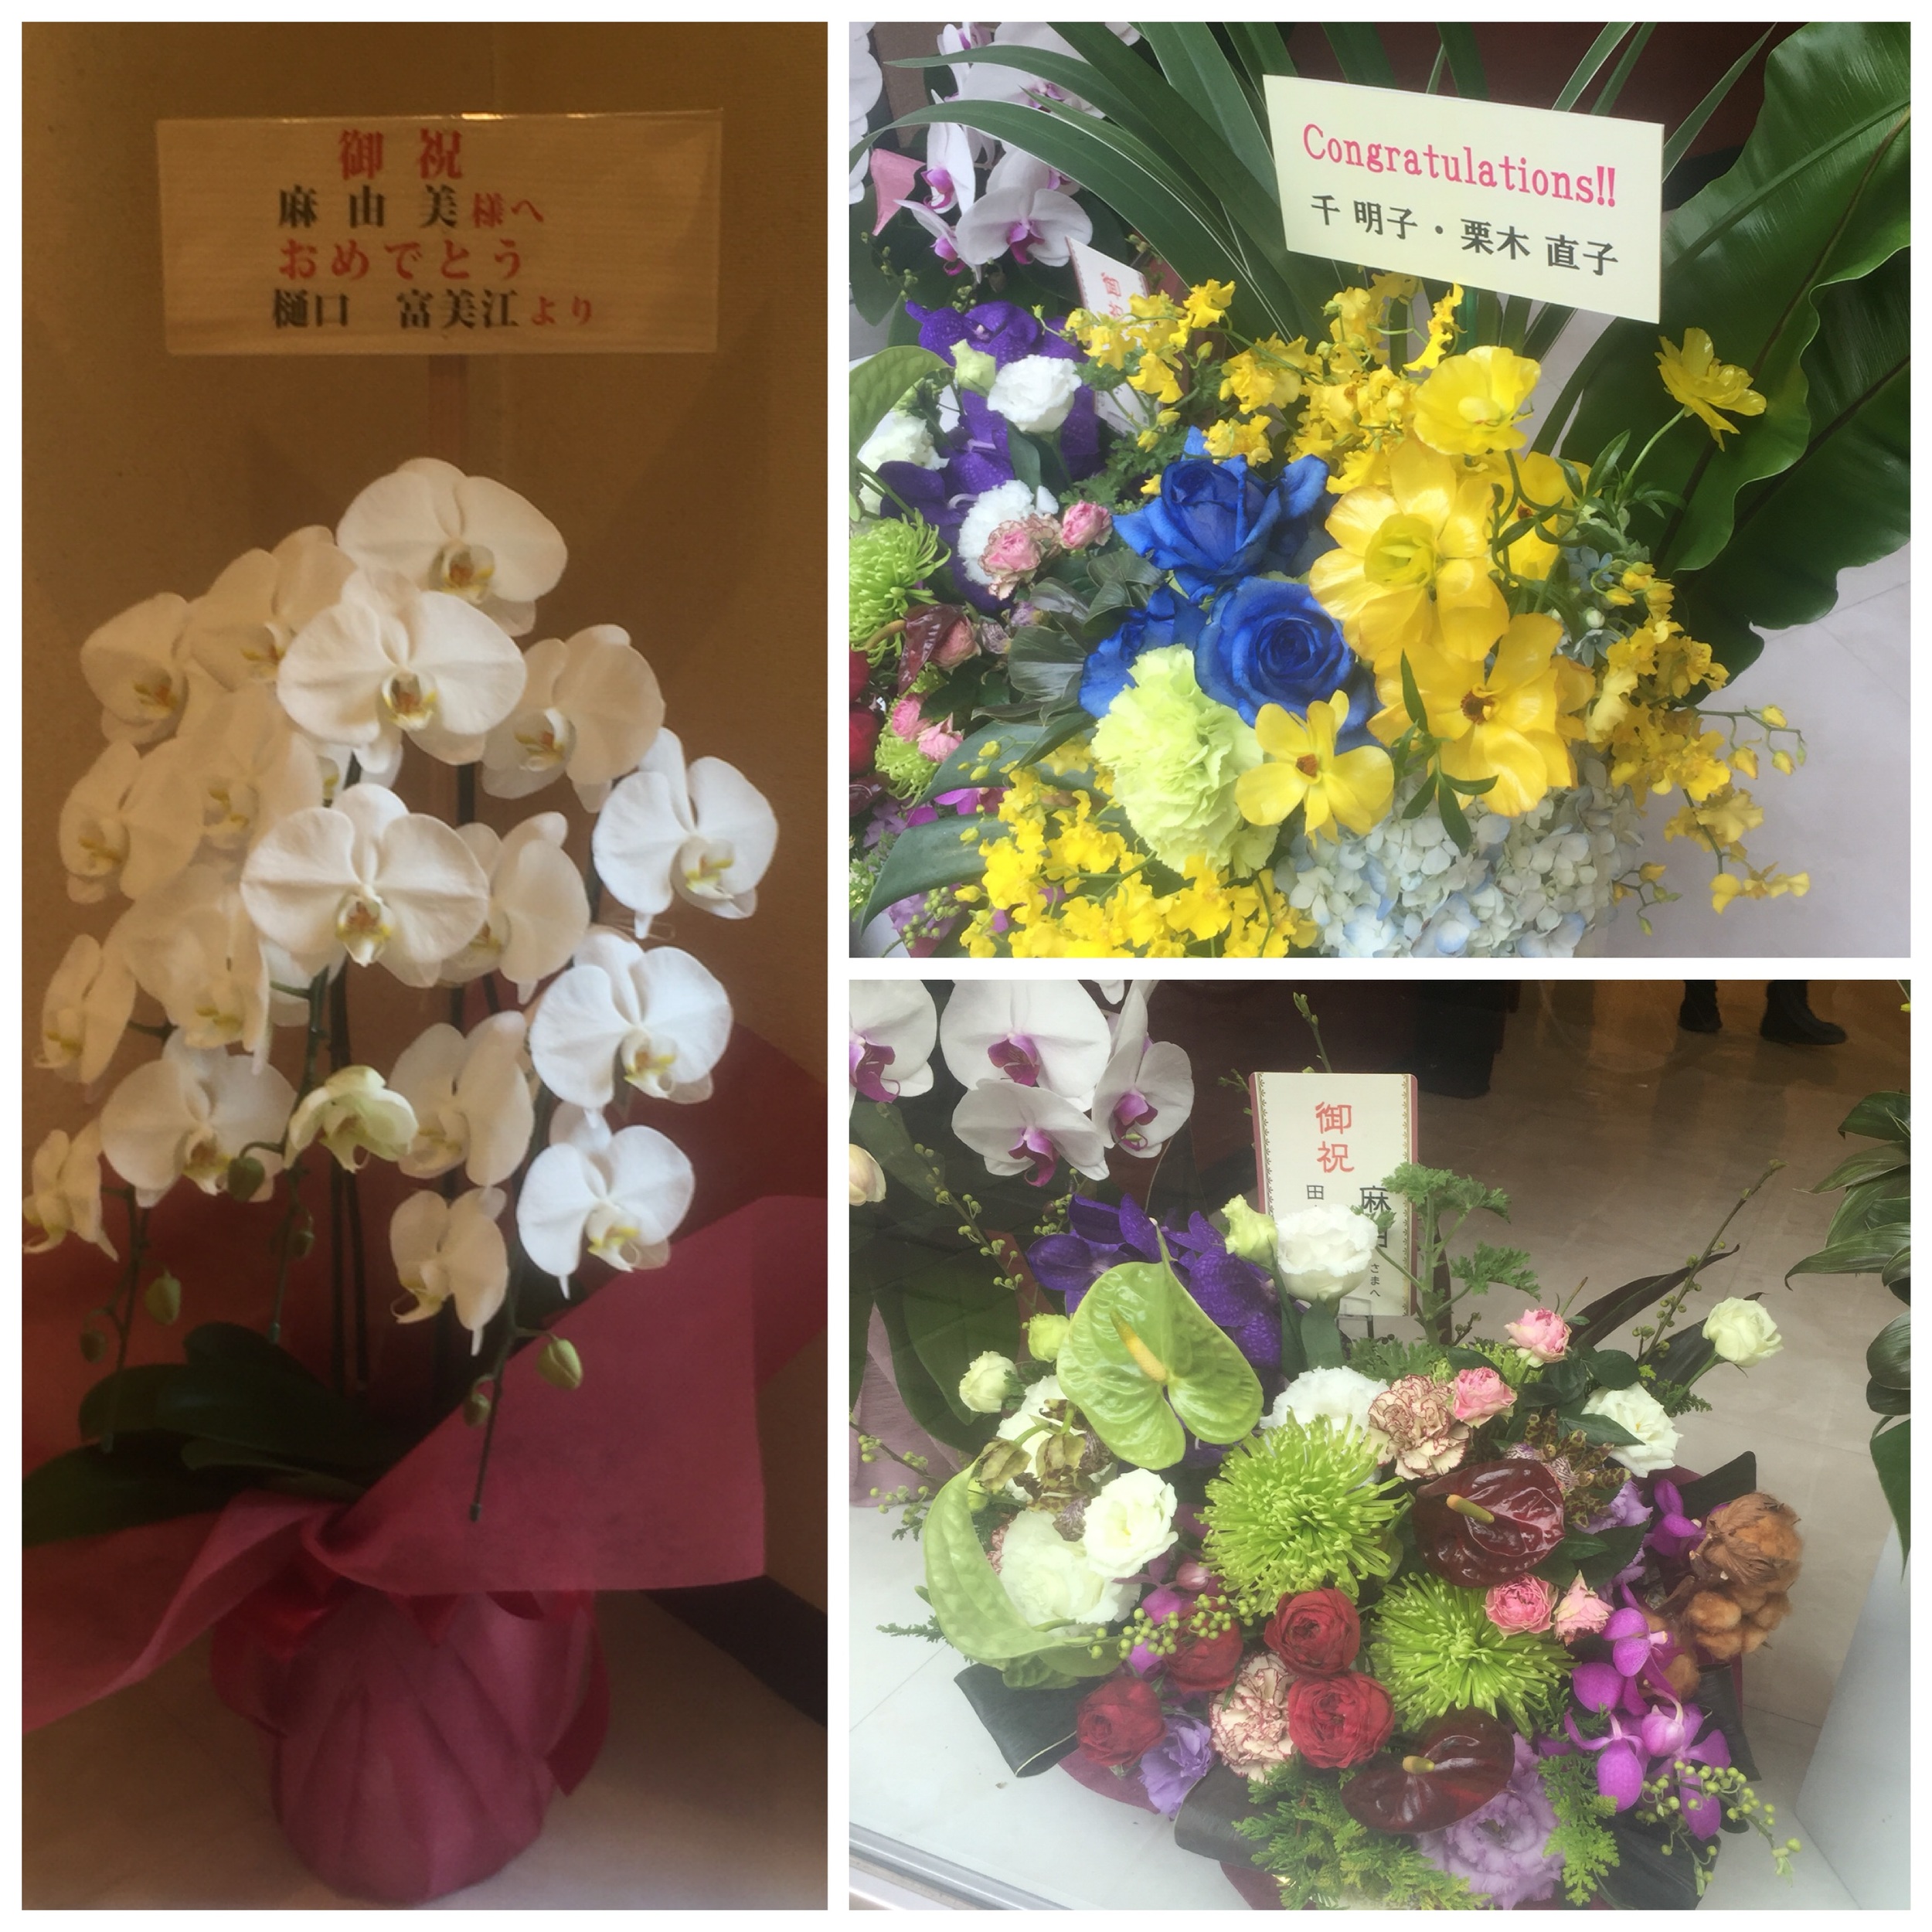 A wonderful tradition here in Japan, Congratulation flowers!